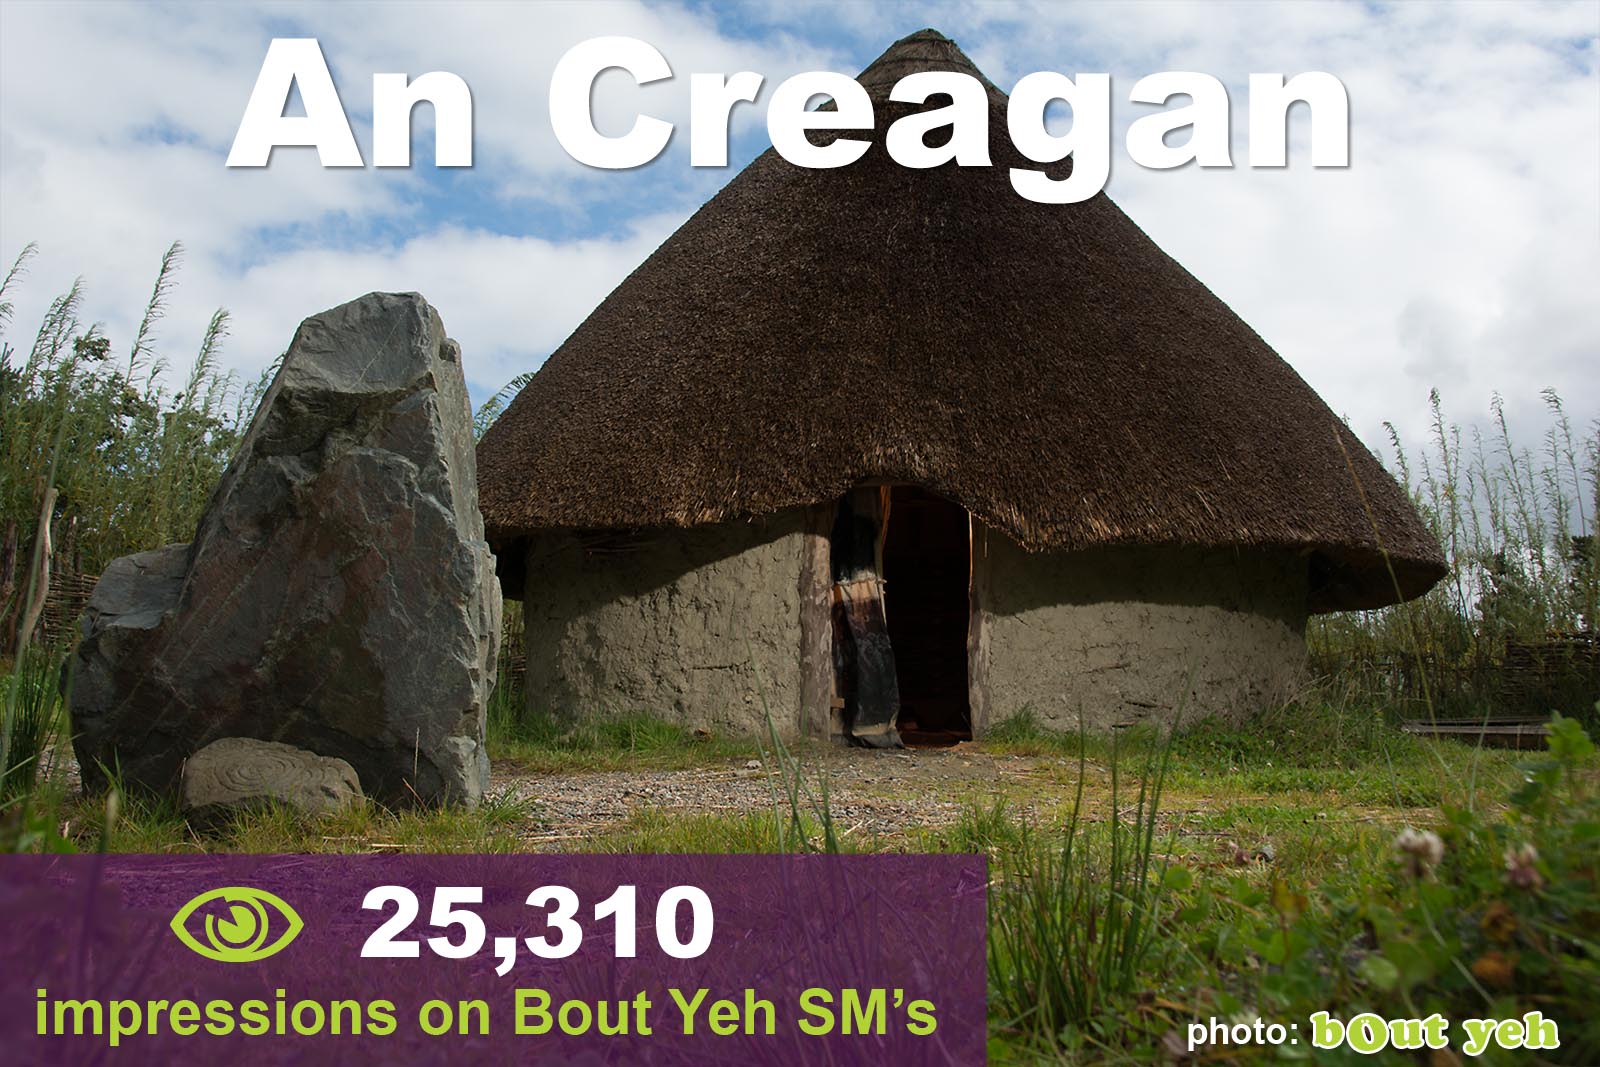 Social Media Marketing Consultants Belfast - An Creagan SMM campaign overview photo. Photo by Bout Yeh used in a Social Media Marketing campaign across Bout Yeh's Social Media platforms for An Creagan Northern Ireland.